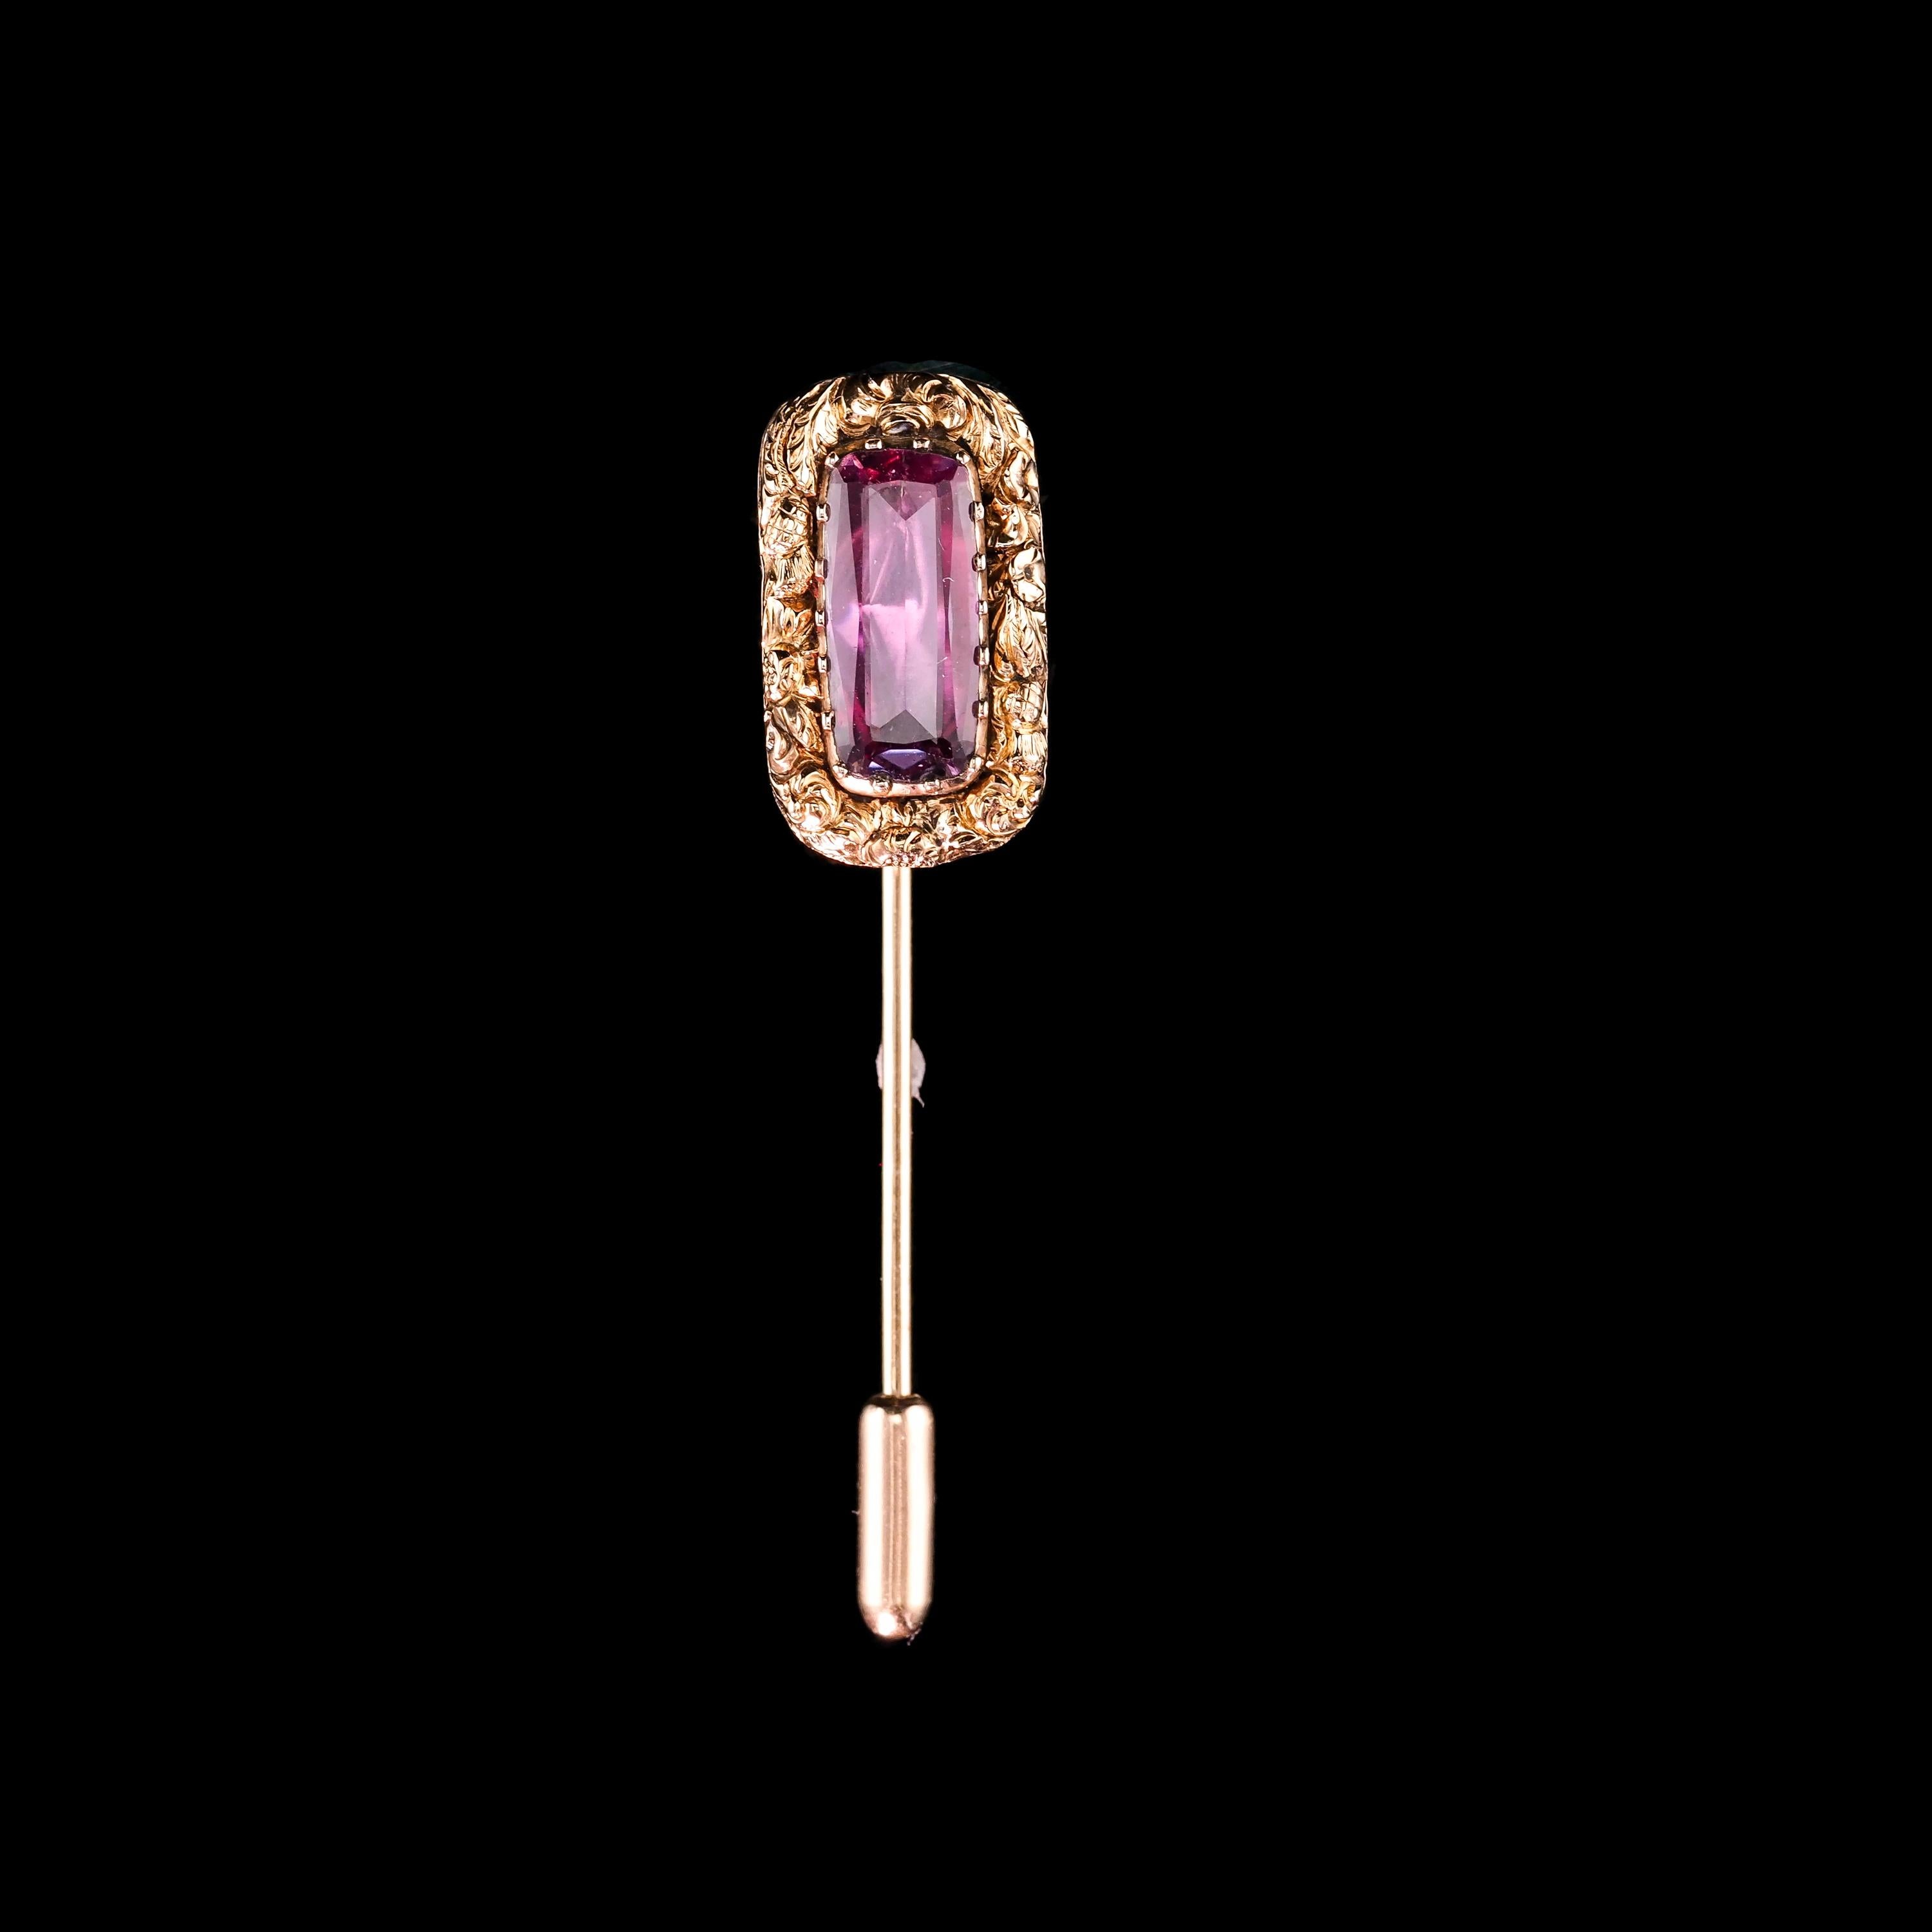 We are delighted to offer this stunning 15ct gold Georgian stick pin made c.1810 most probably in England.
 
Traditionally, stick pins were worn by wealthy English gentlemen with both an aesthetic and functional purpose: to keep a cravat in place